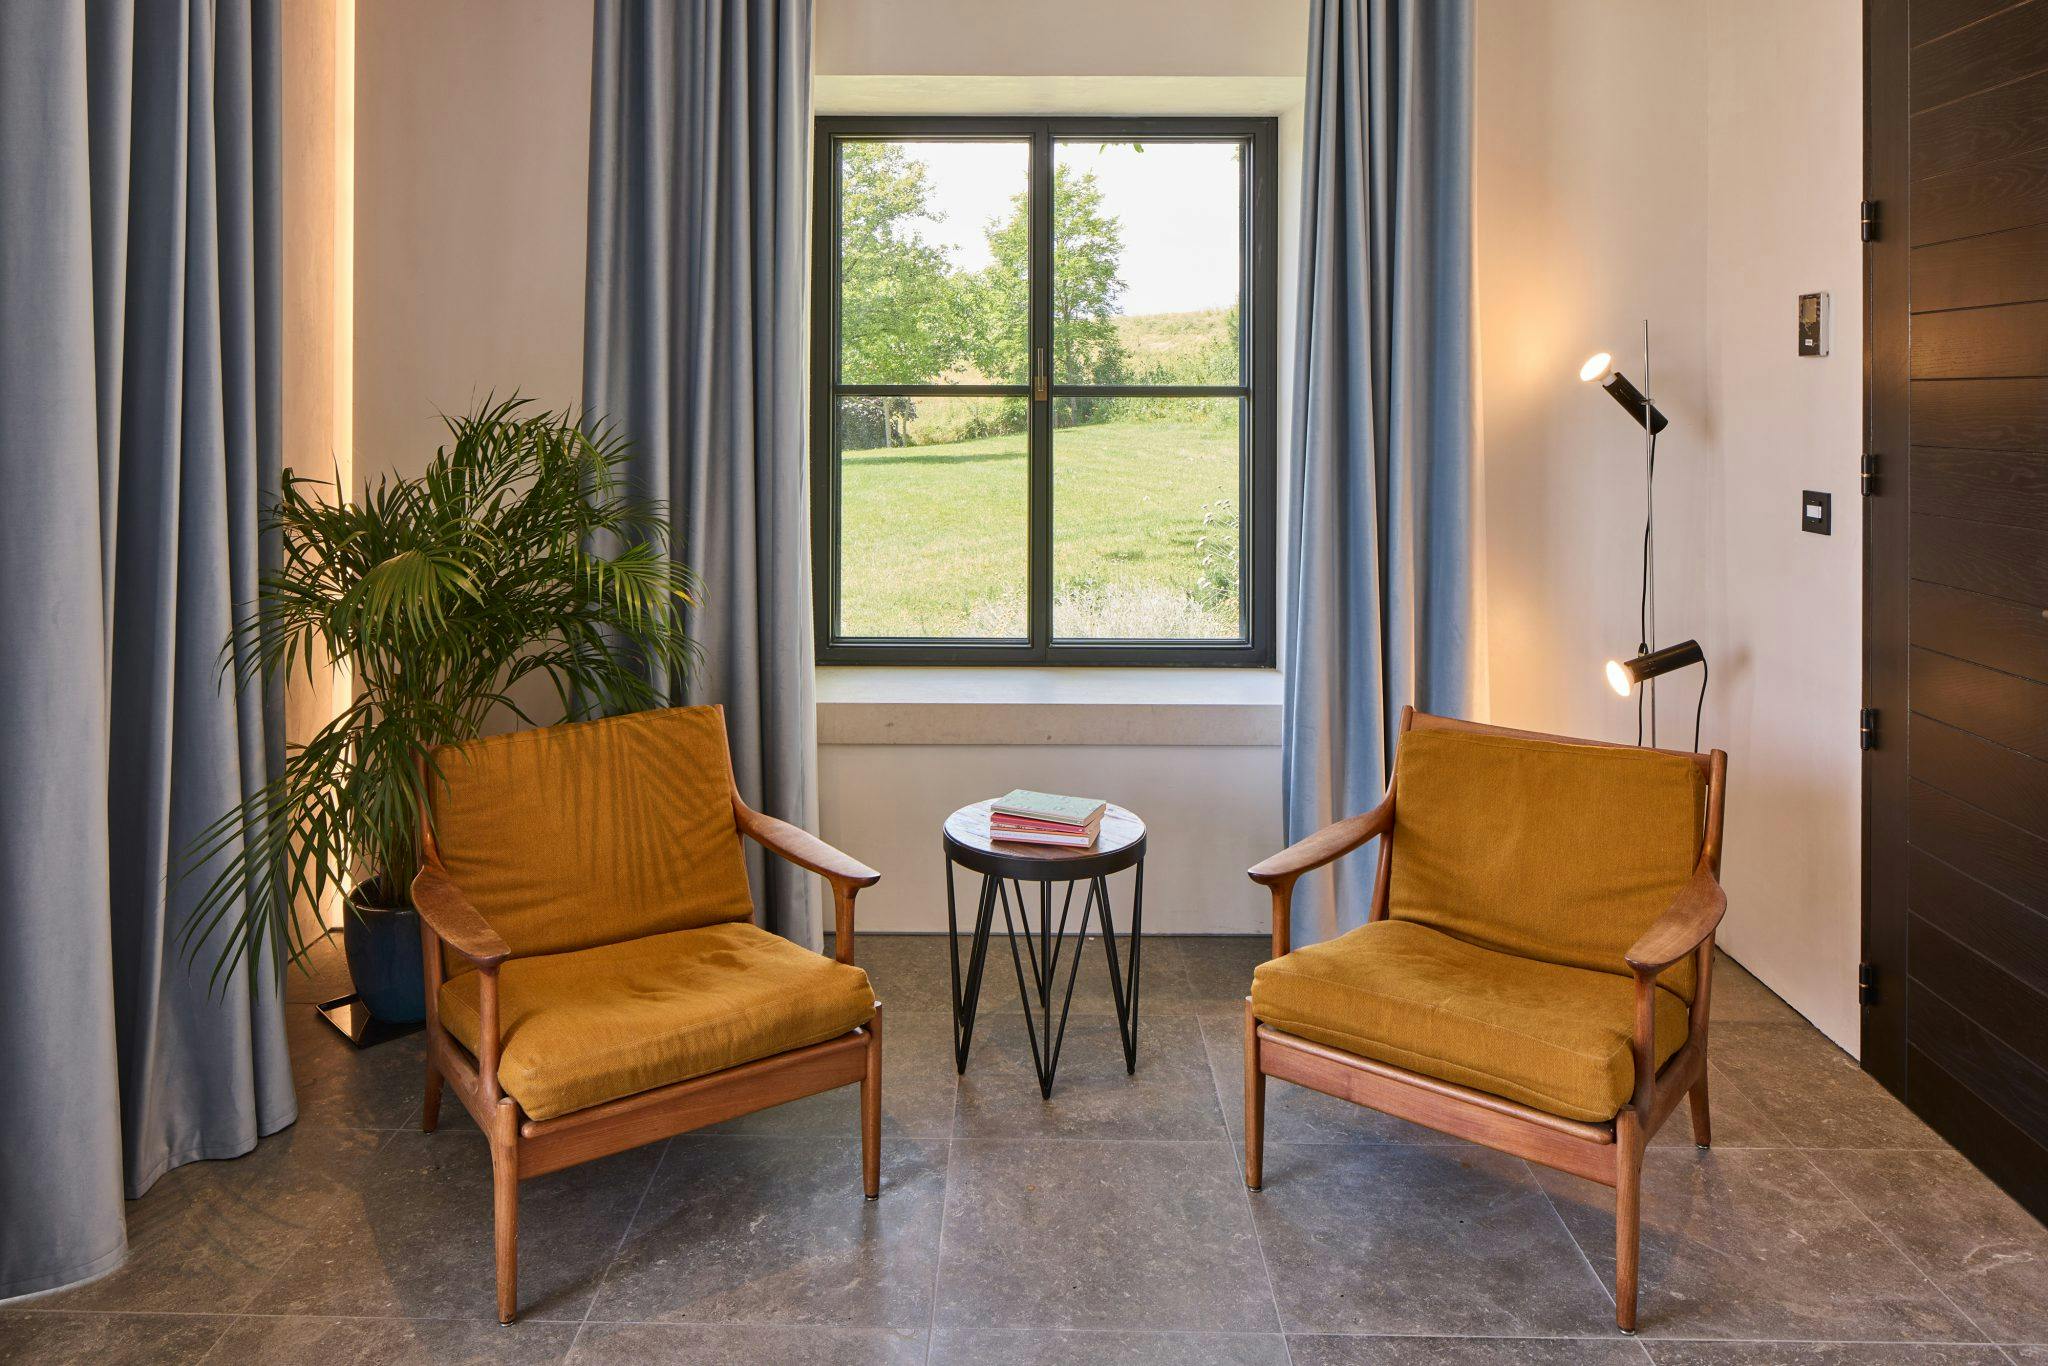 Two mid-century armchairs in front of a window overlooking nature